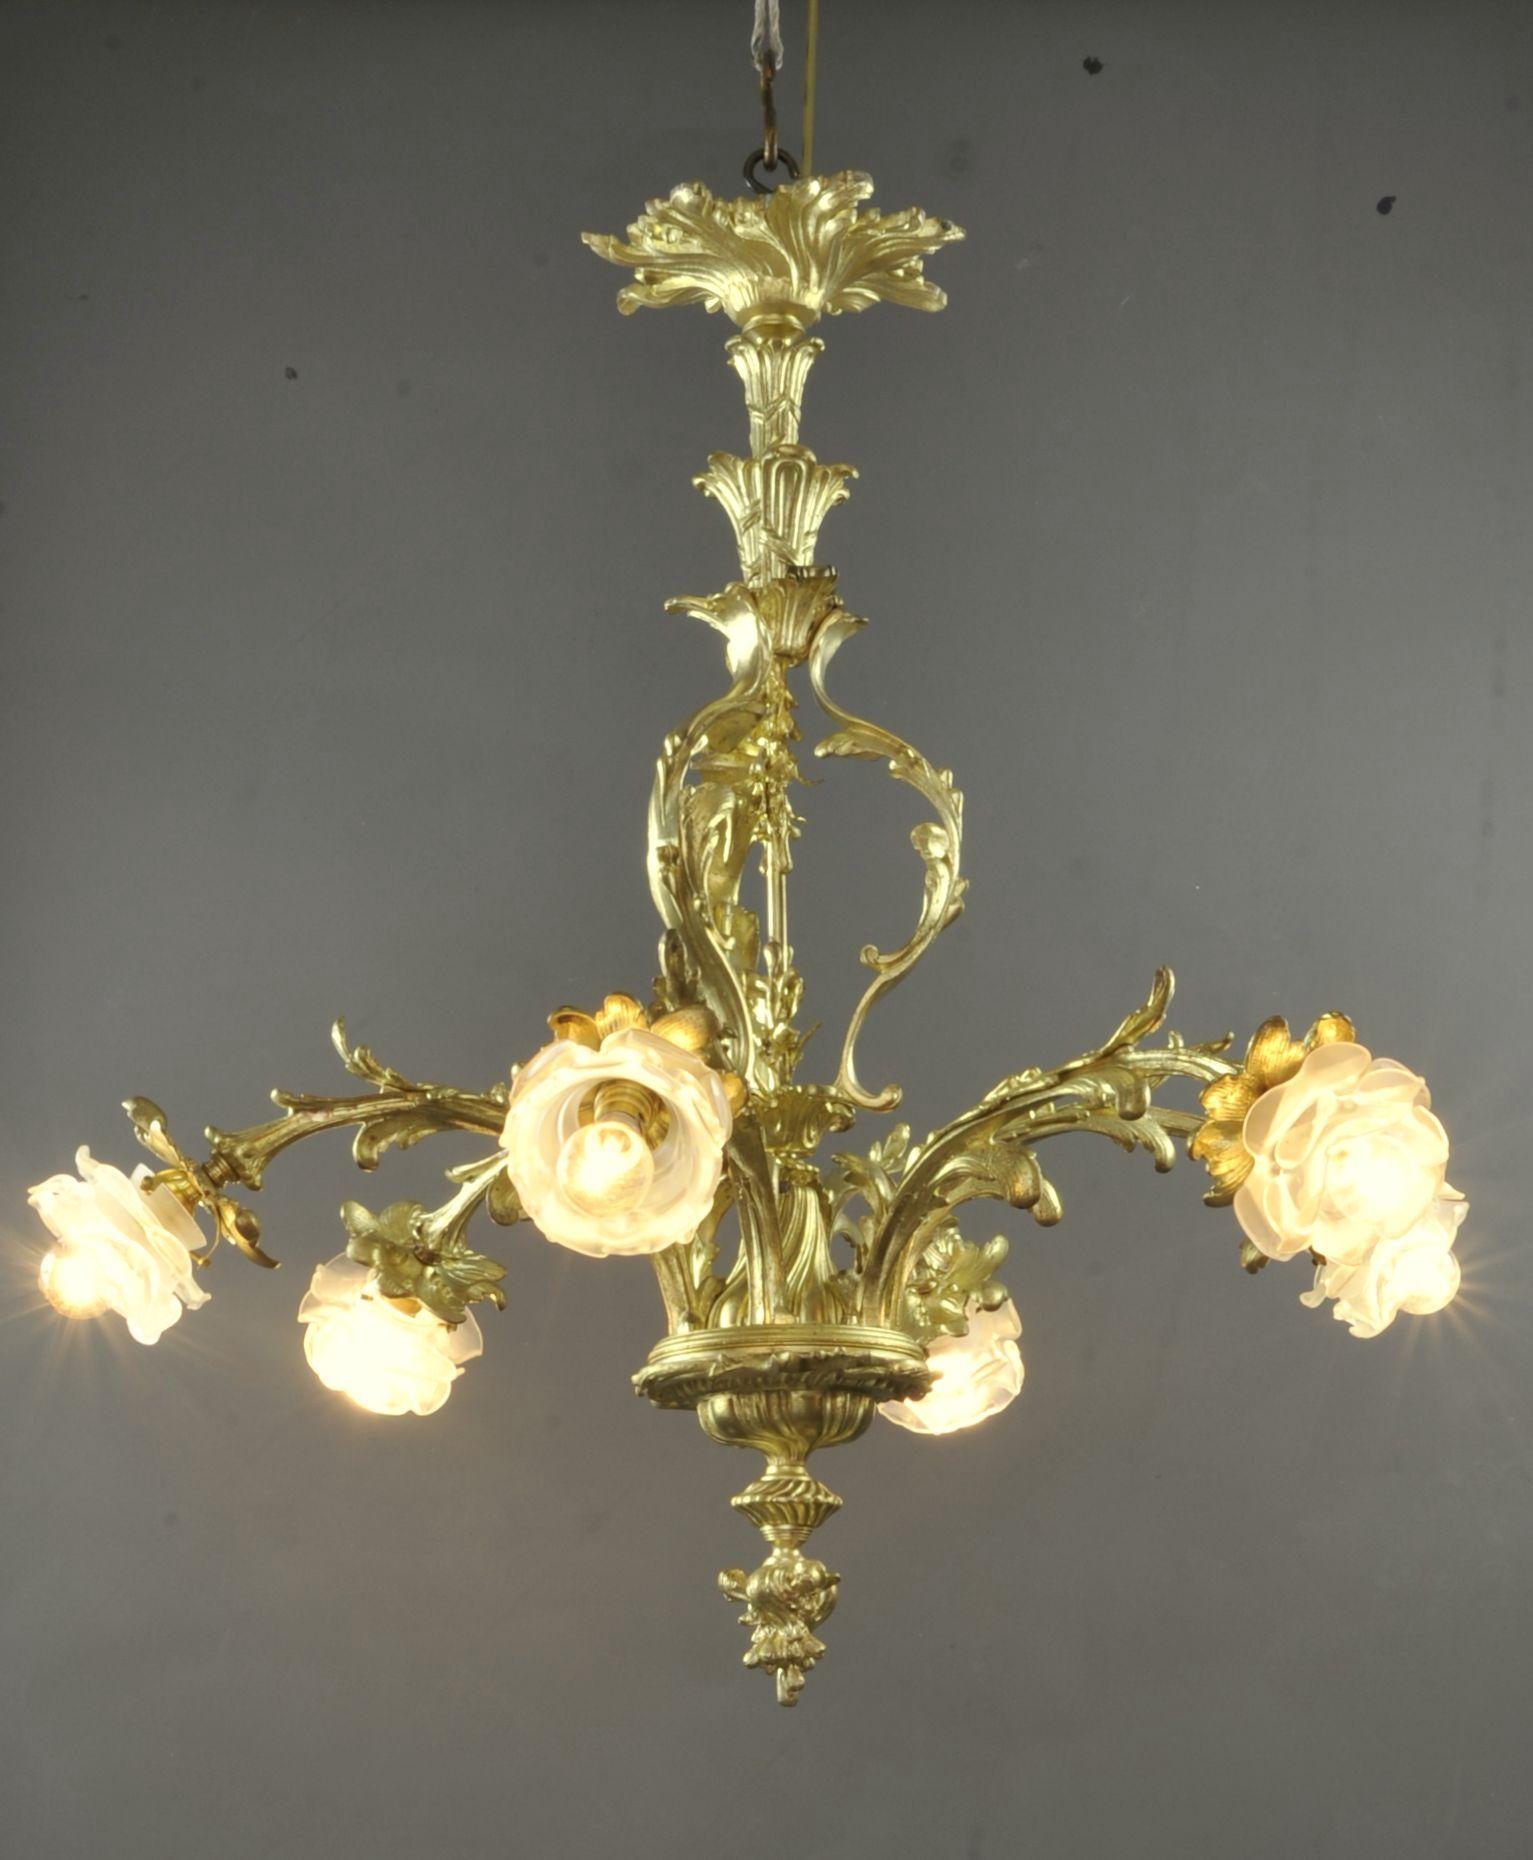 Magnificent Napoleon III chandelier in gilded and chiseled bronze with rich vegetal decoration, with turbulent shapes of rocaille inspiration, lighting with 6 arms of light ending in a frosted glass tulip in the shape of a rosebud.

French work